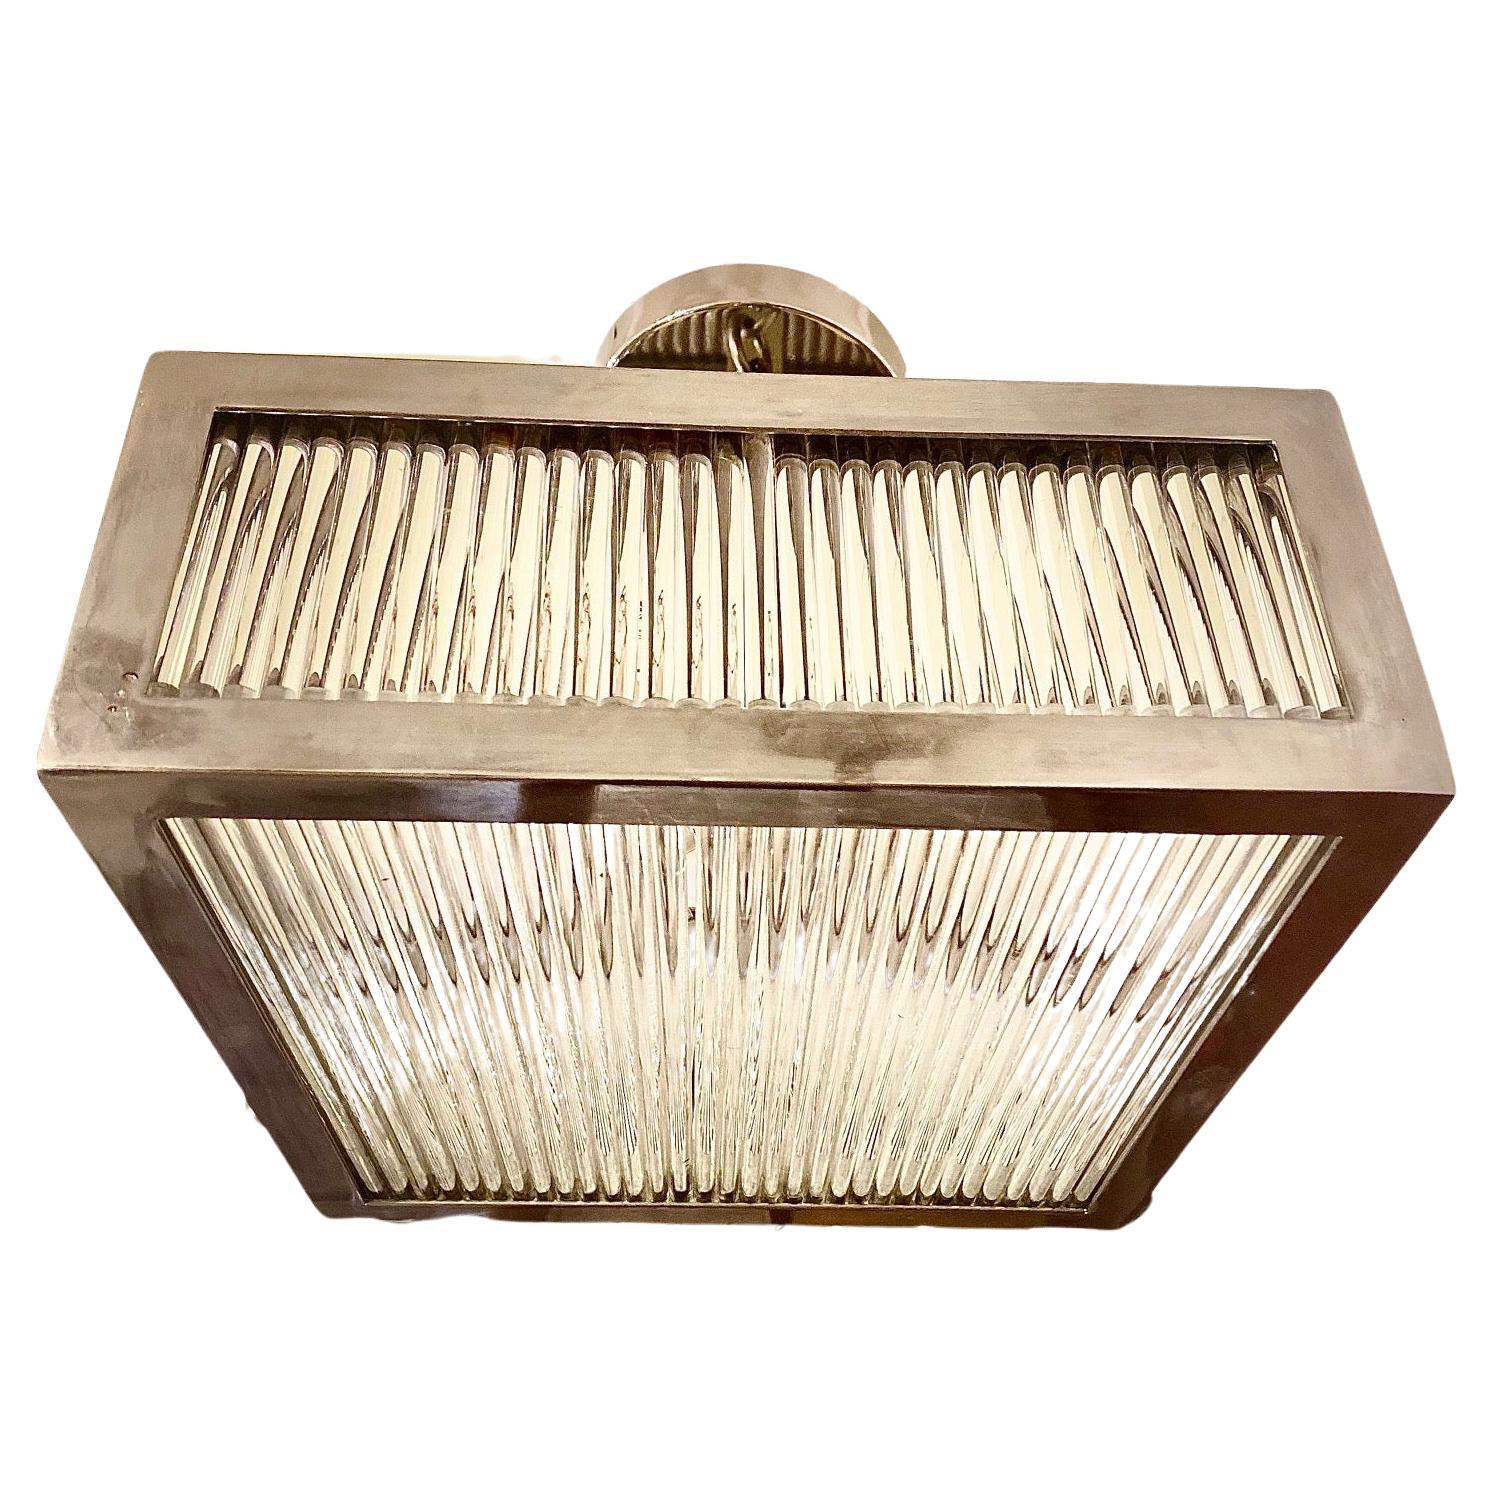 Set of circa 1960's French nickel-plated square glass-rod ceiling fixtures with 4 interior candelabra lights. Sold individually.

Measurements:
Length: 12